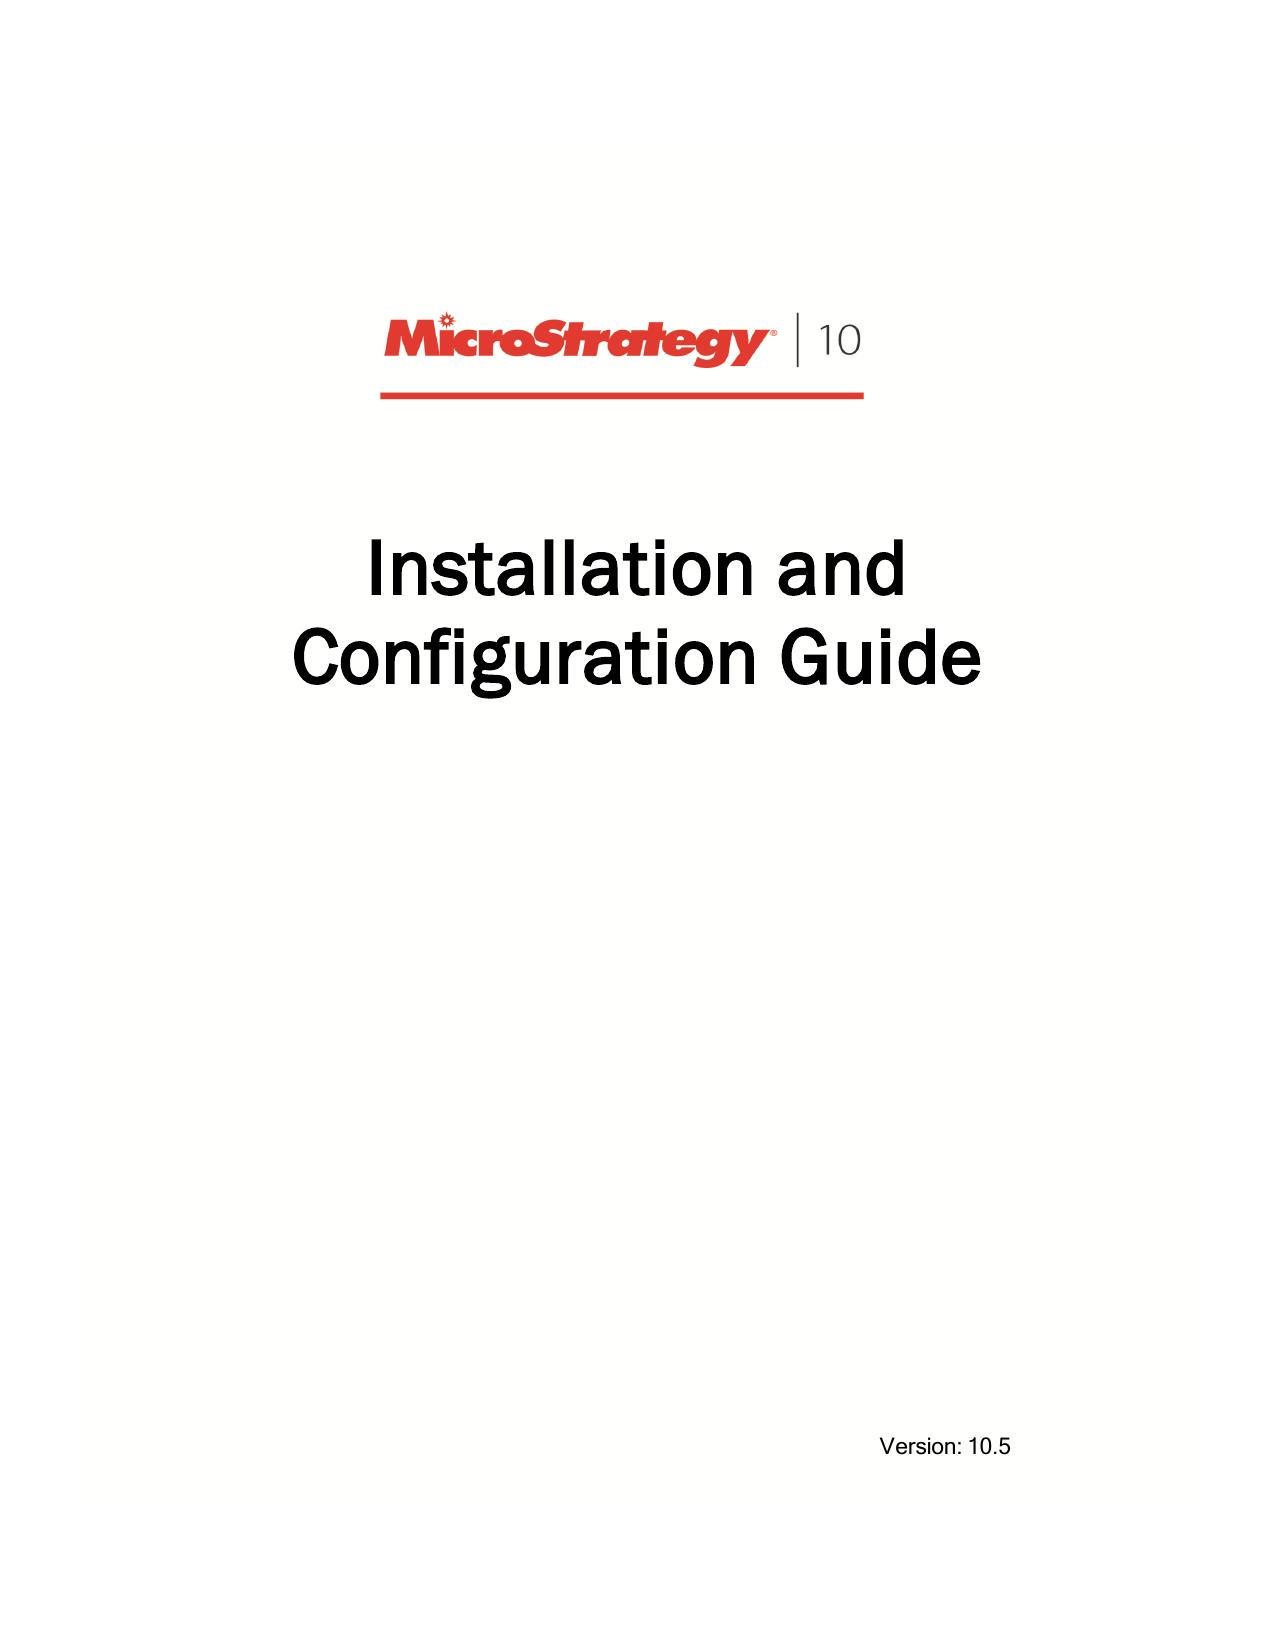 Installation and Configuration Guide